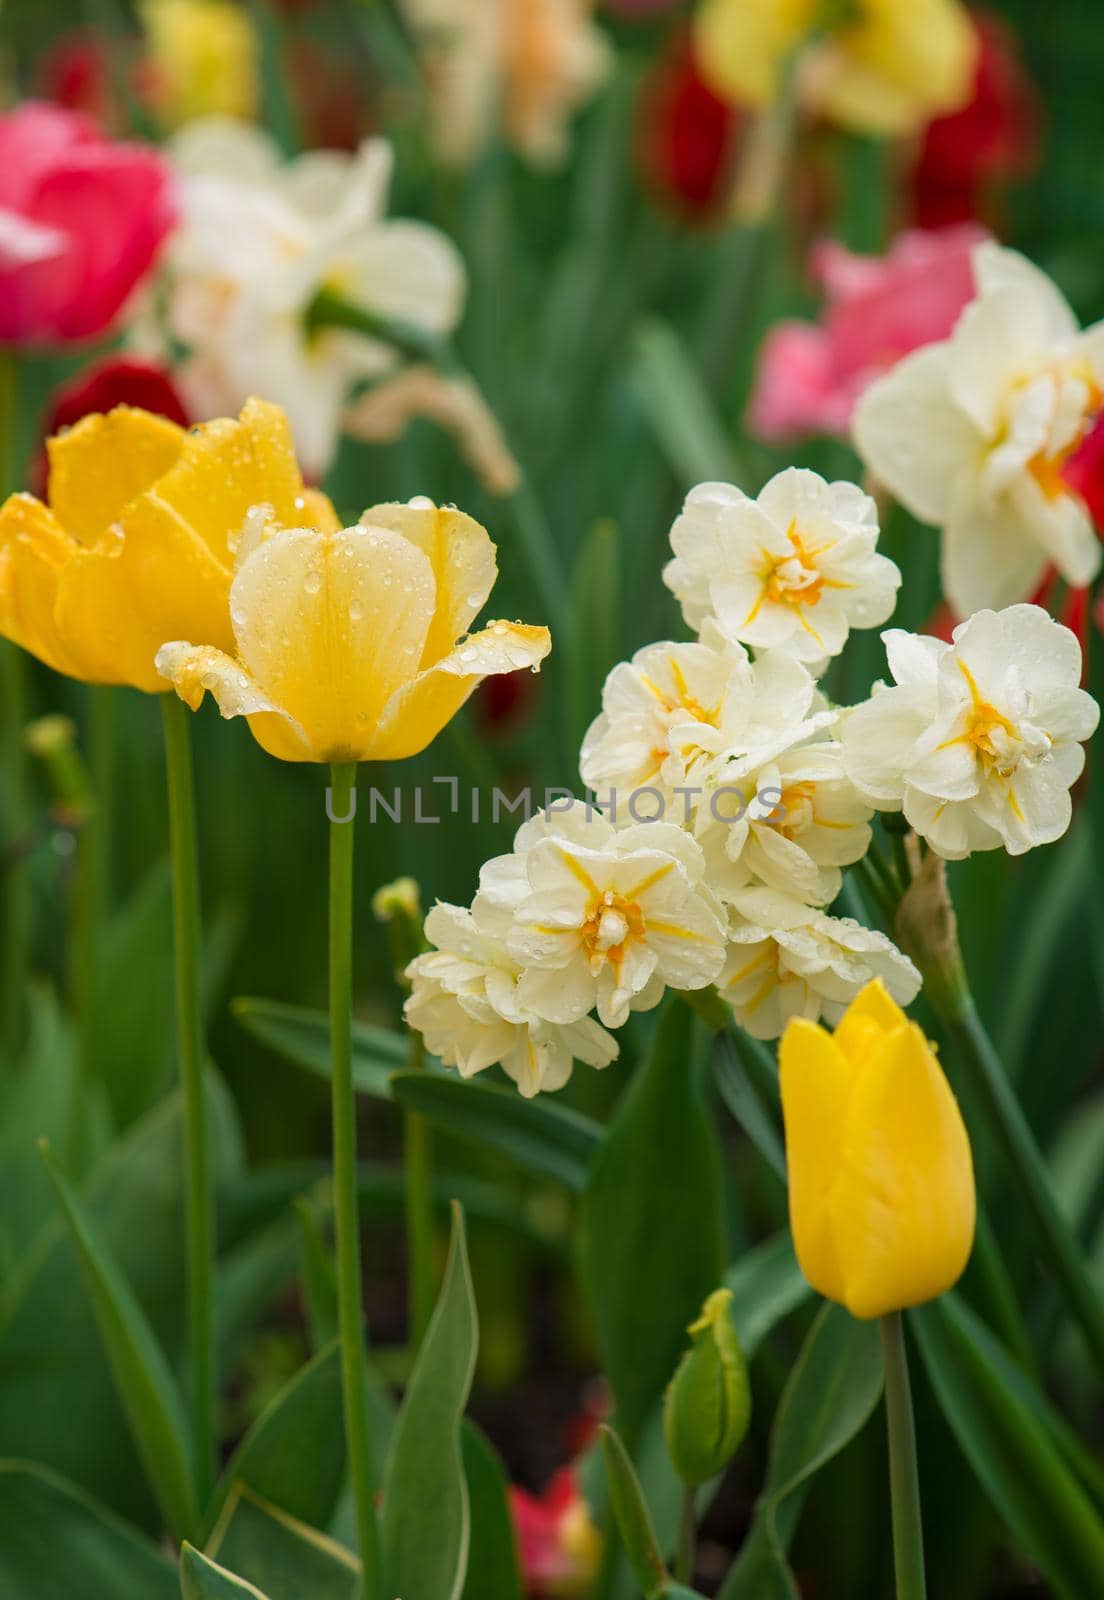 Tulips flowers on a blur background of nature. by aprilphoto